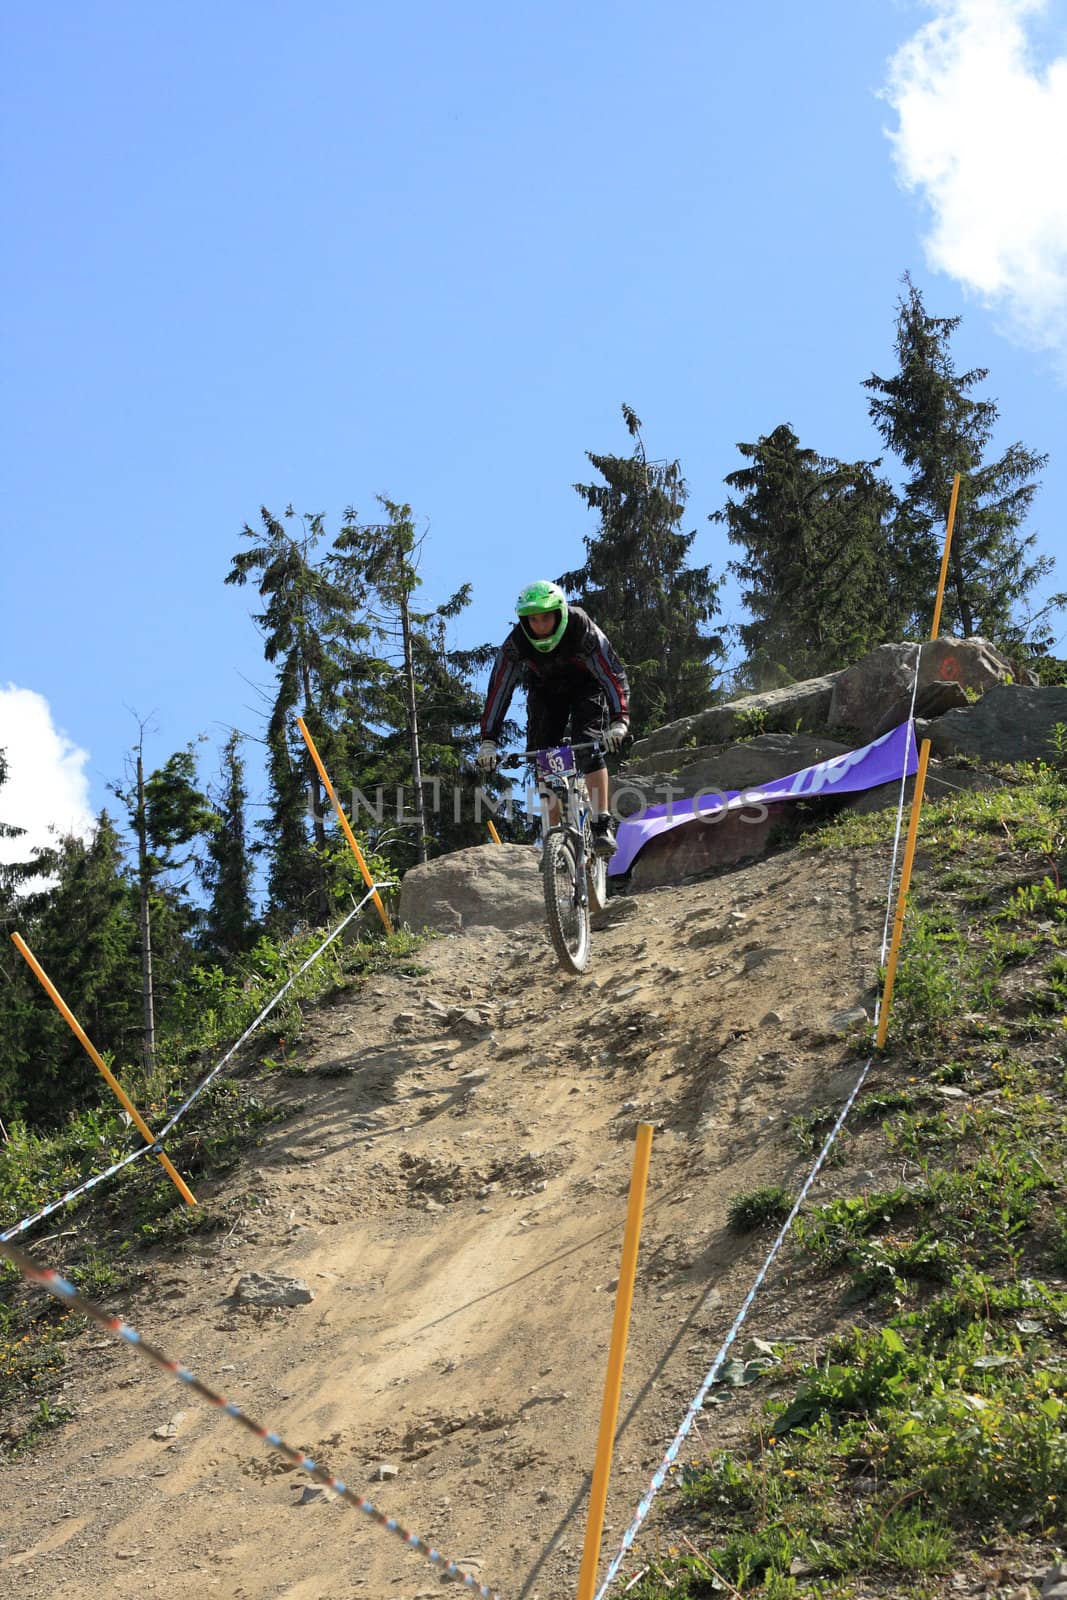 WILLINGEN, GER - JUNE 17, unknown competitor #93, racing at downhill qualification, not qualifying for final race, Willingen, Germany, June 17, 2011